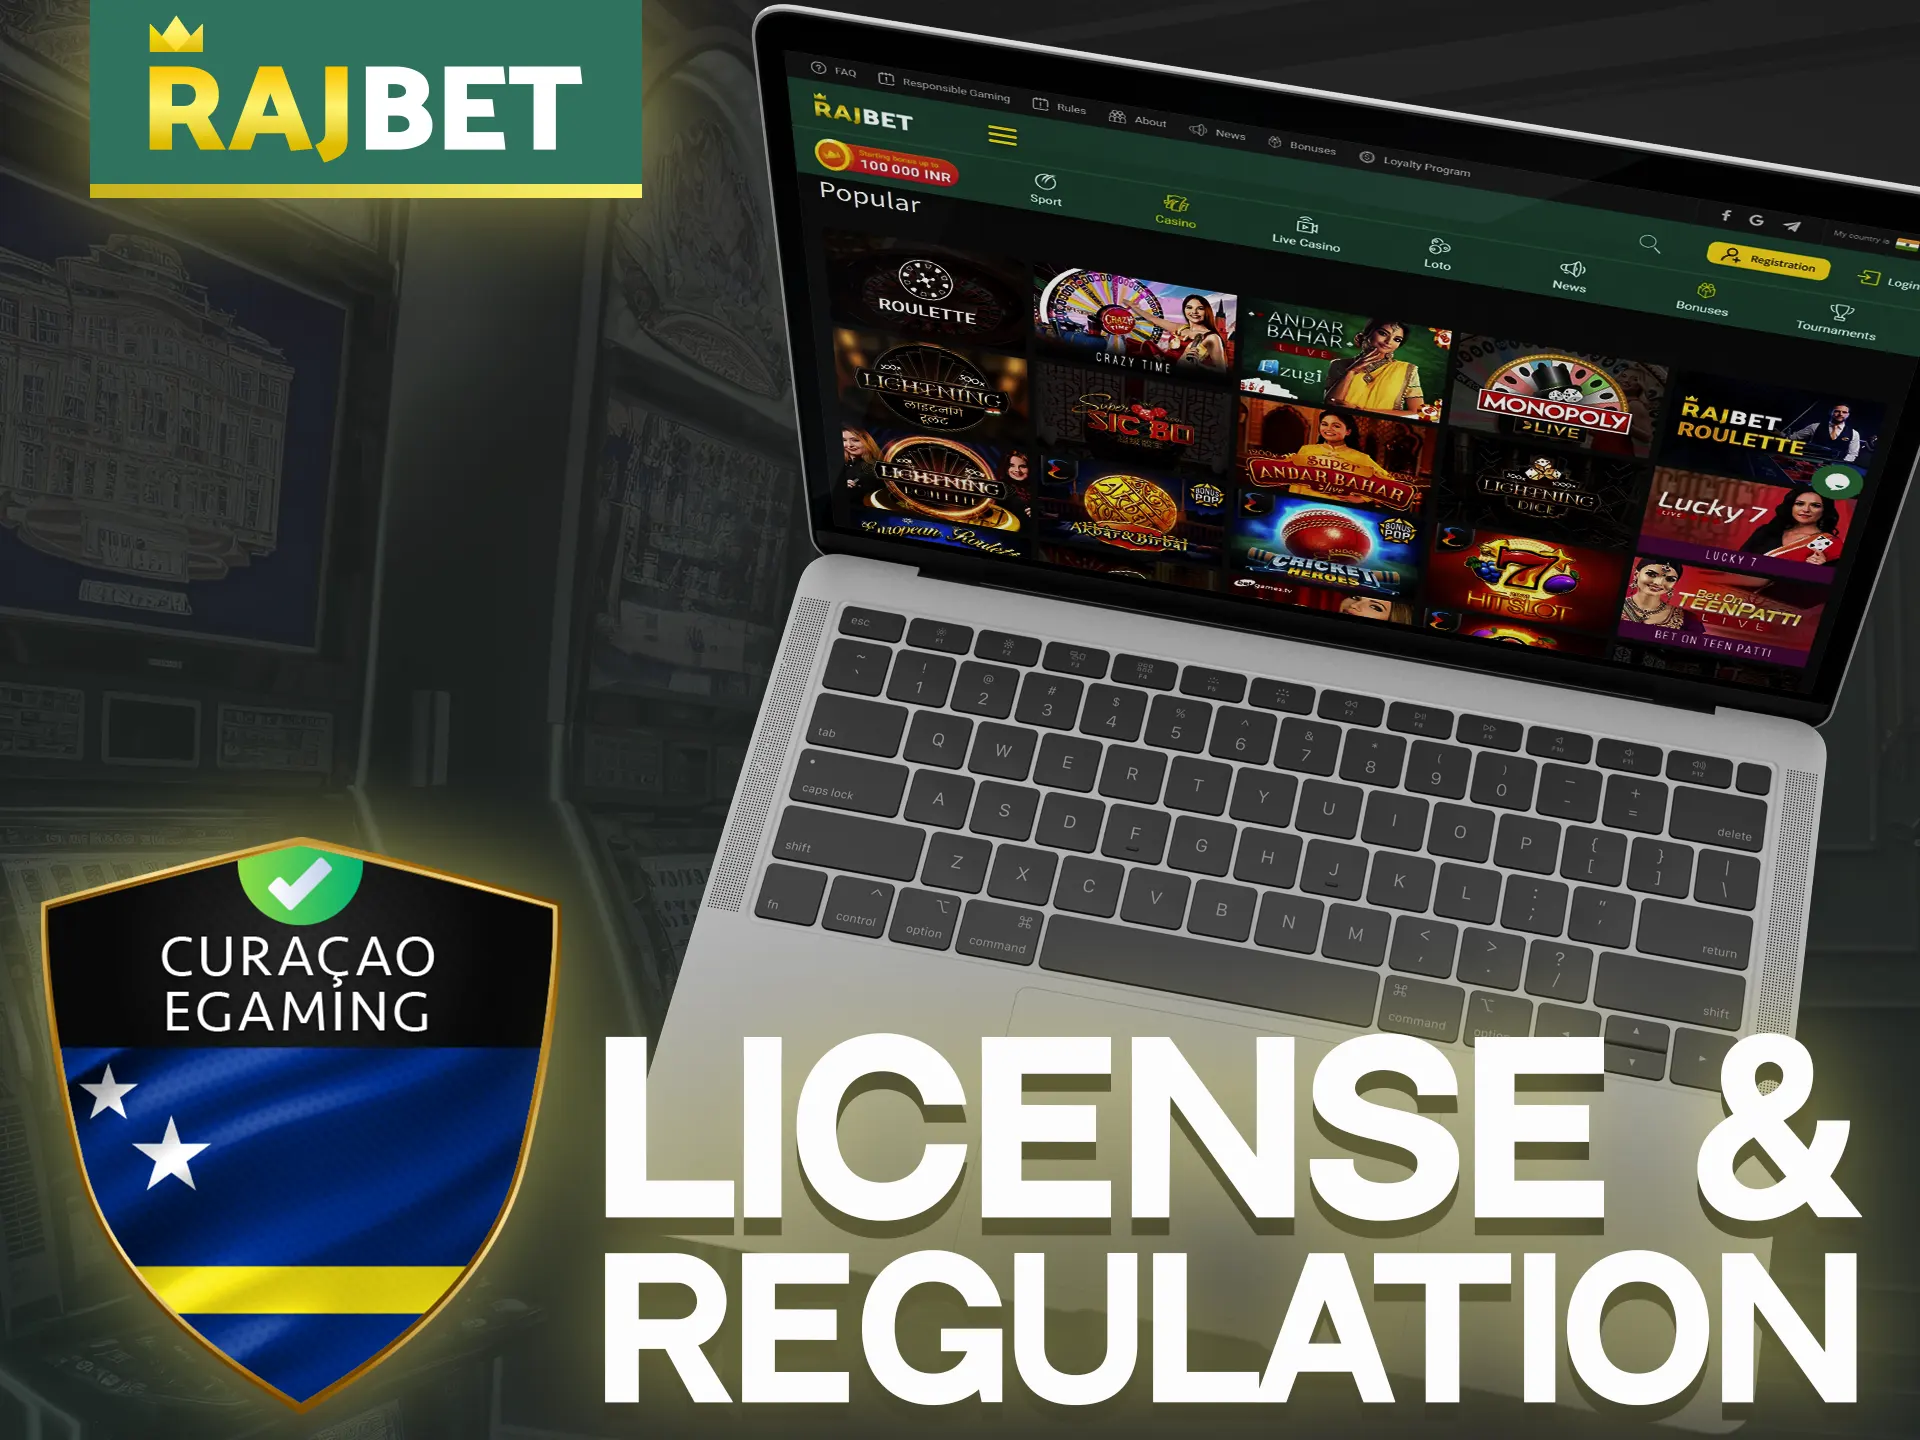 Rajbet Casino is licensed by Curacao eGaming.